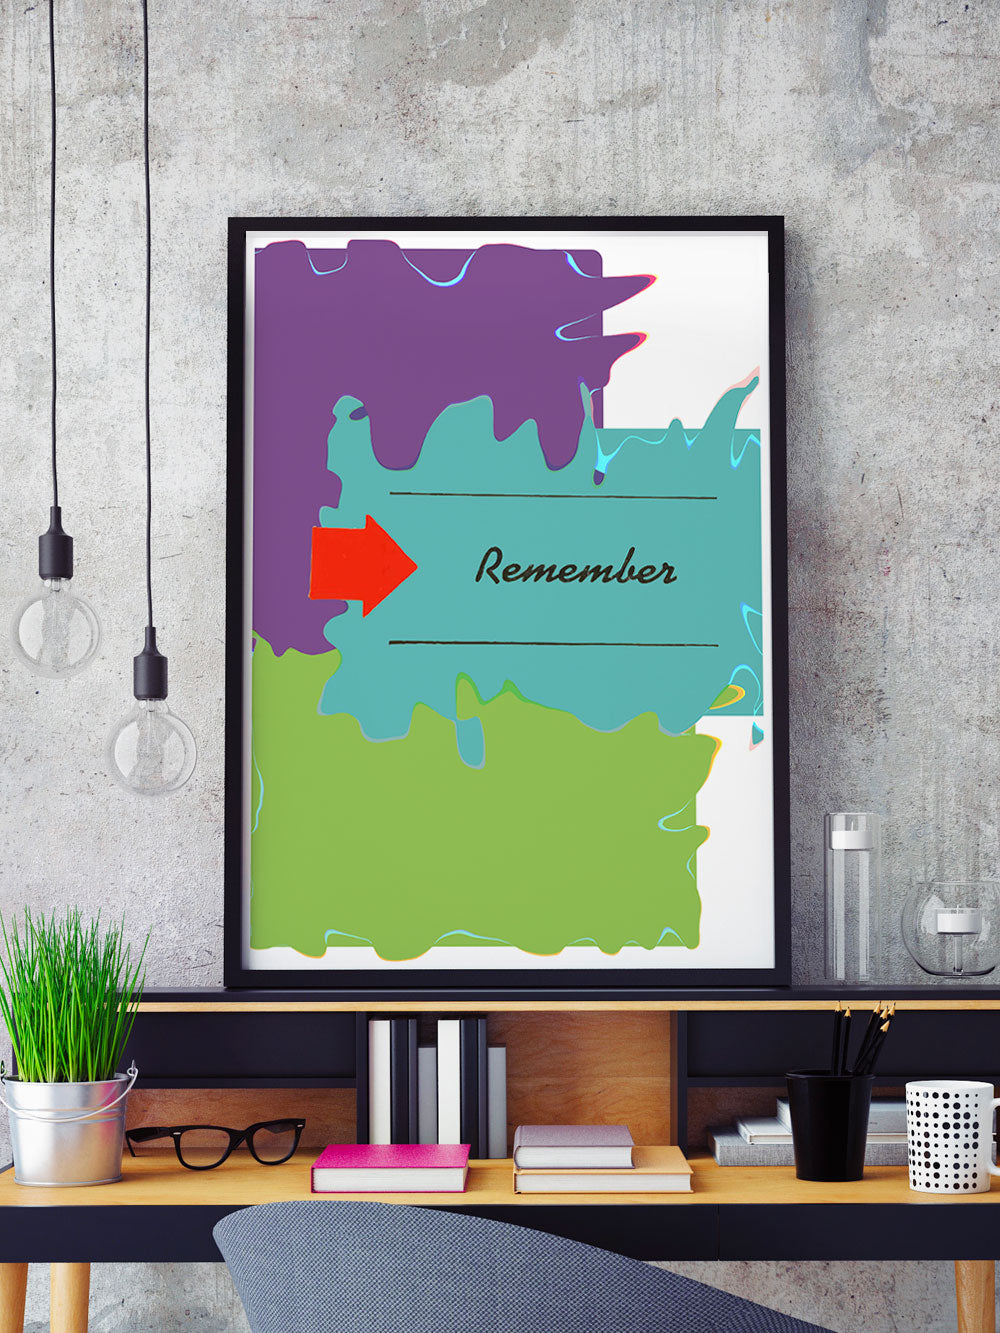 Remember Whats Coming Minimal Art Print in a frame on a shelf